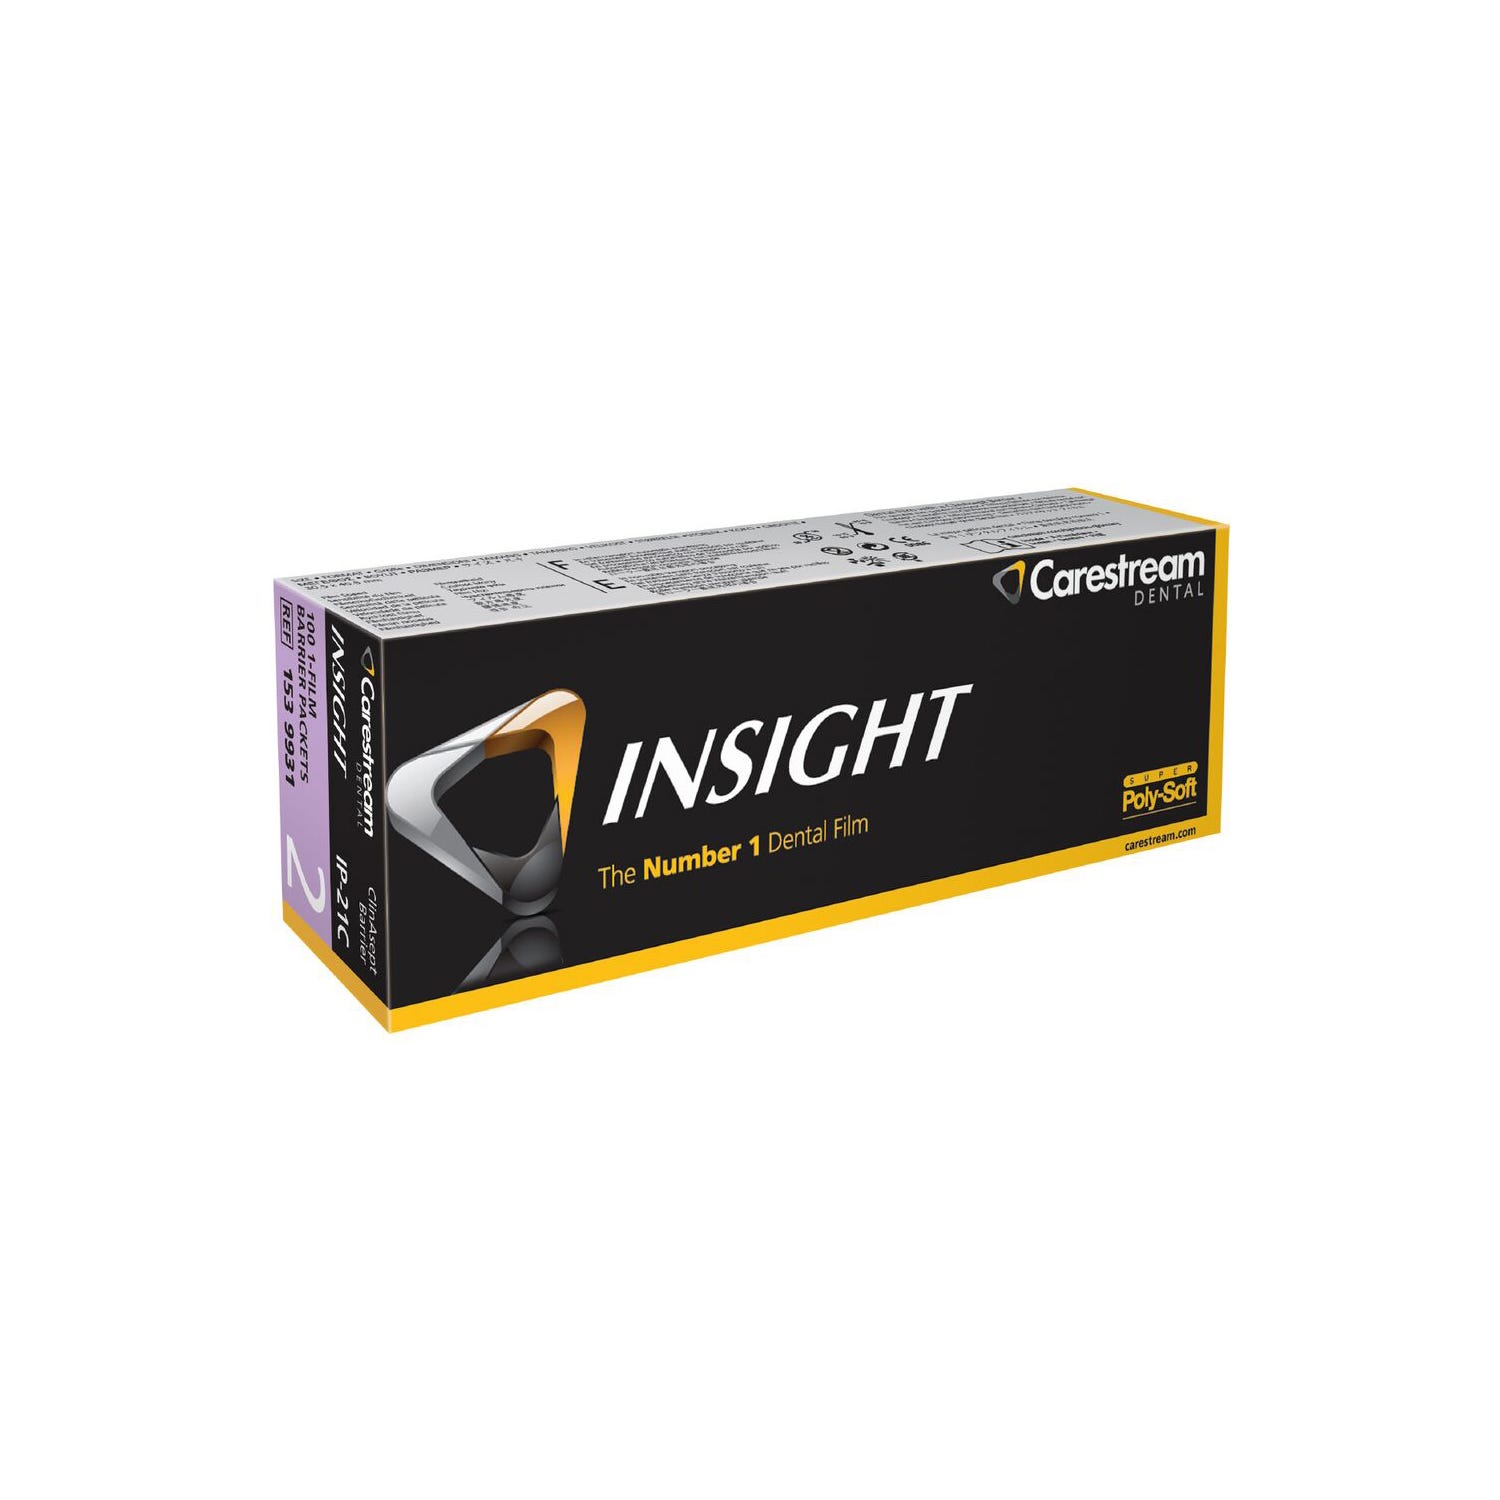 INSIGHT Dental Film, Size 2, IP-21C, Super Poly-Soft Packets w/ ClinAsept Barrier - 100/Box